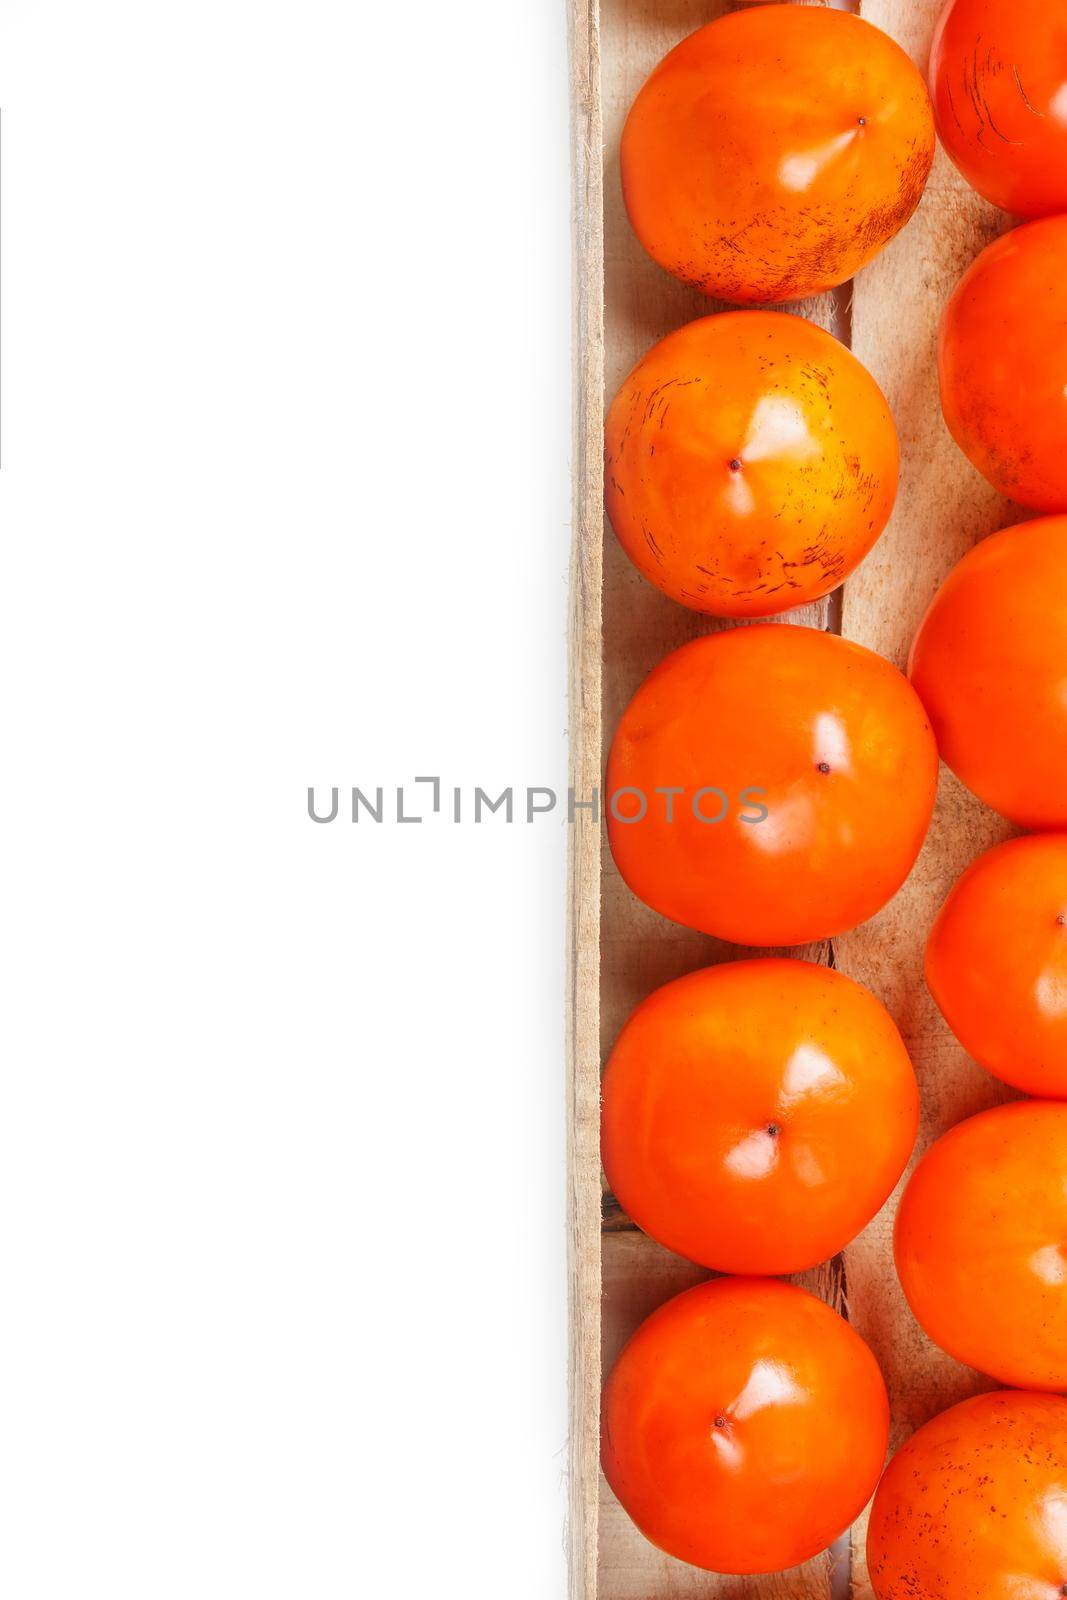 Persimmon fruit in the wooden box isolated on white. Clipping Path included. Juicy ripe persimmon in a large wooden box on a white background. The edge of a wooden box with orange persimmon and a place for text on a white background